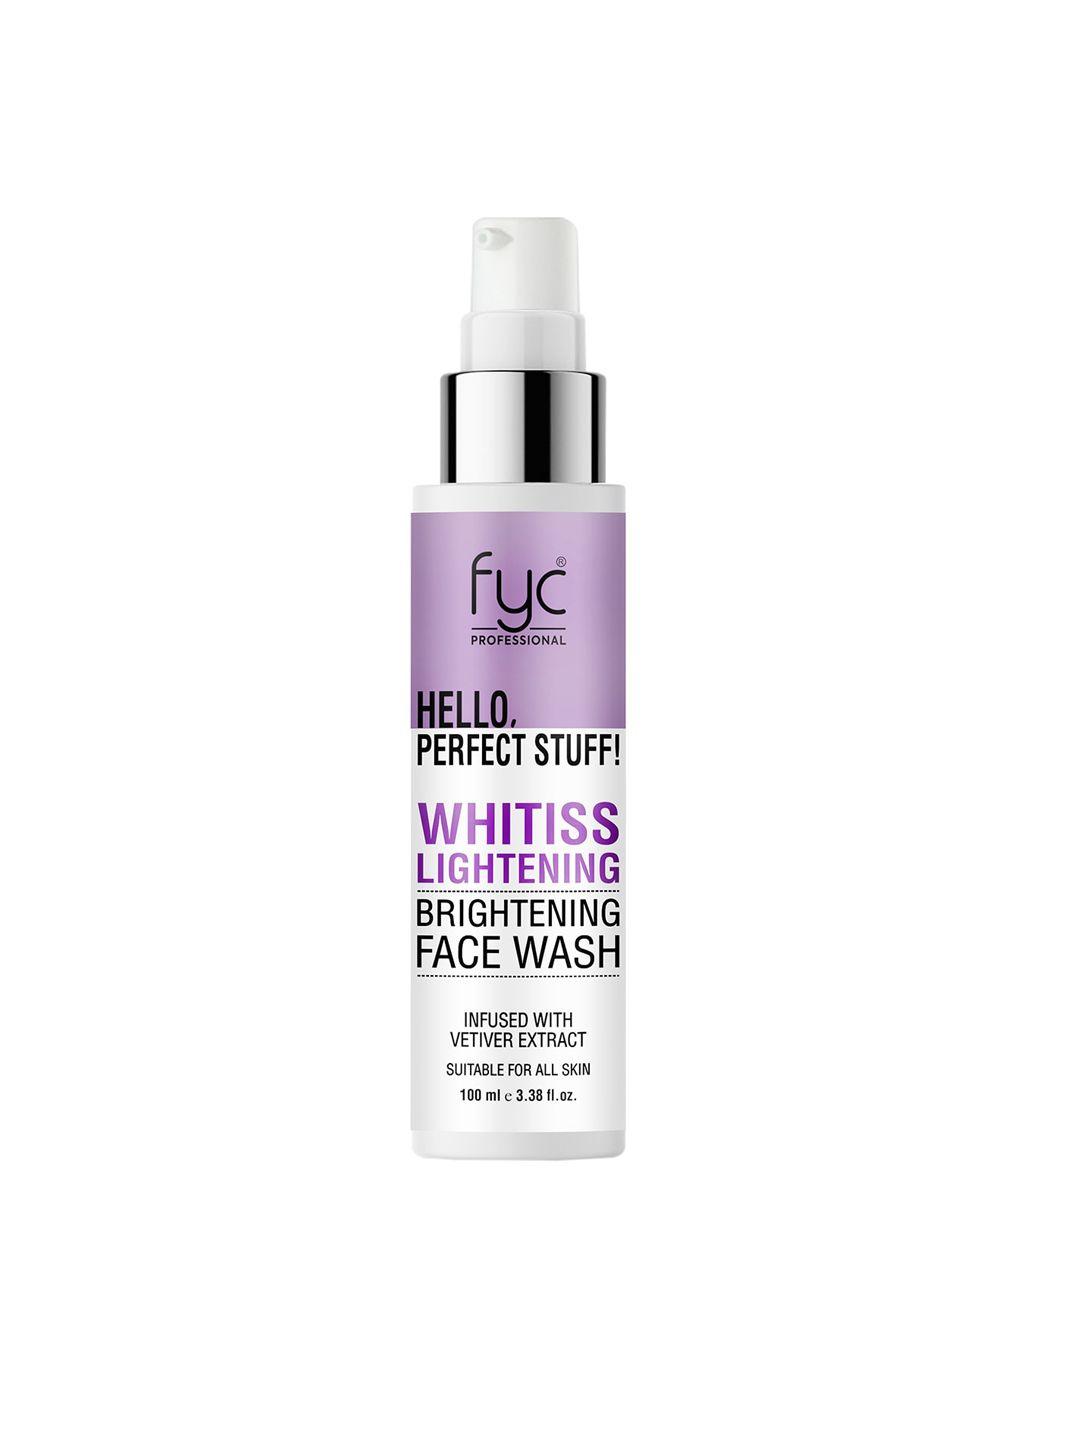 fyc professional whitiss lightening face wash 100ml